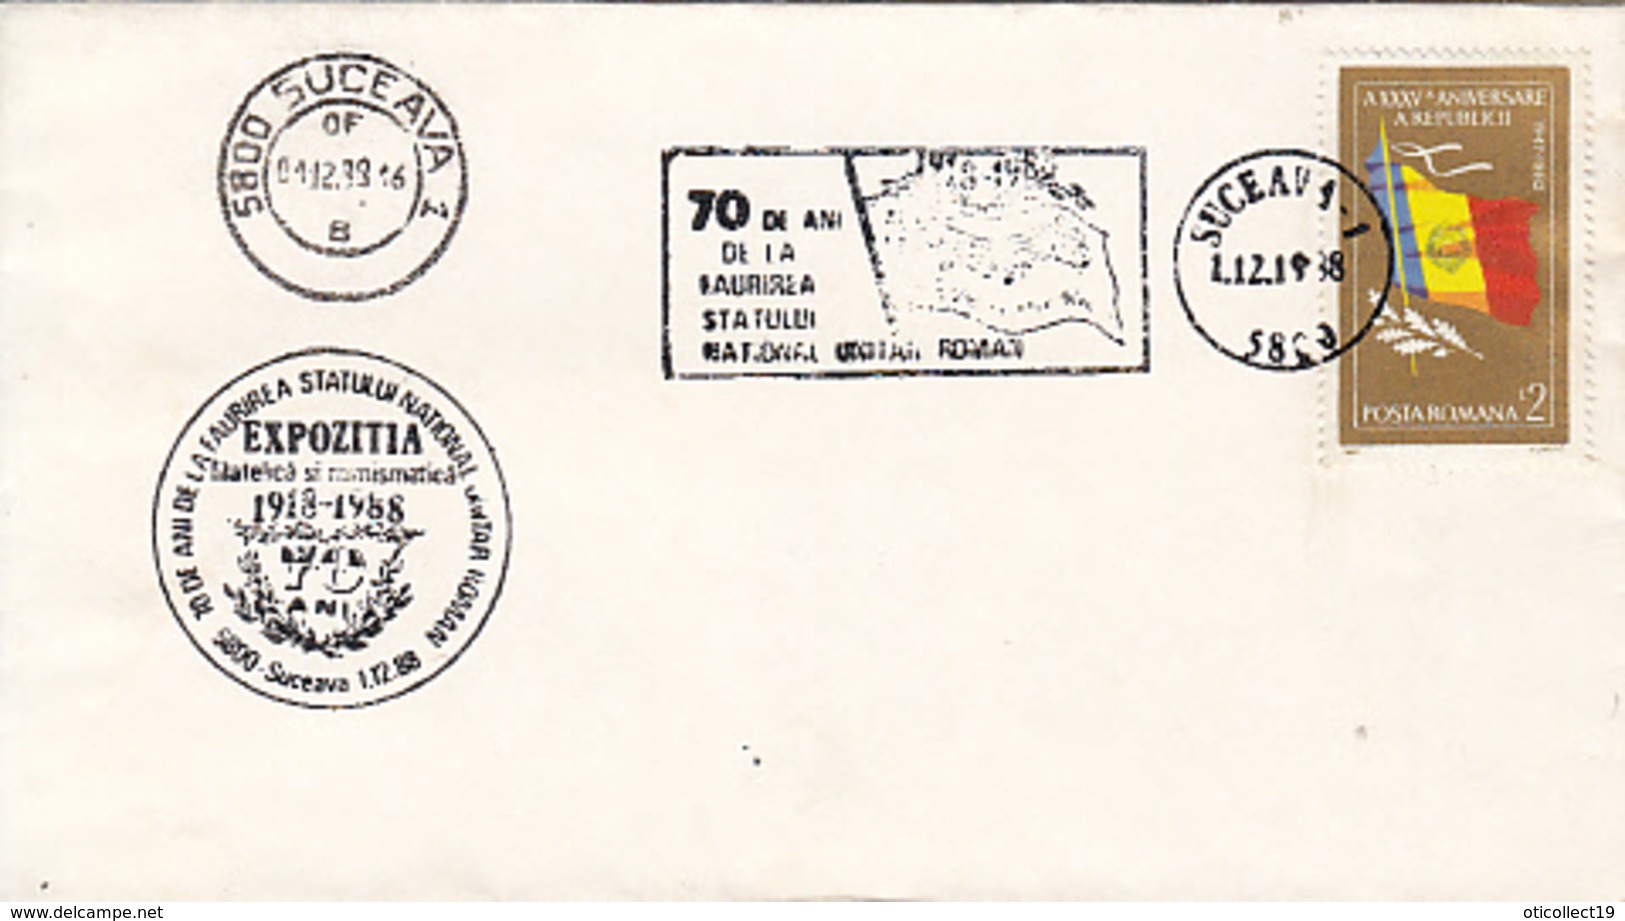 ROMANIAN UNITED STATE ANNIVERSARY, STAMP AND SPECIAL POSTMARKS ON COVER, 1988, ROMANIA - Brieven En Documenten